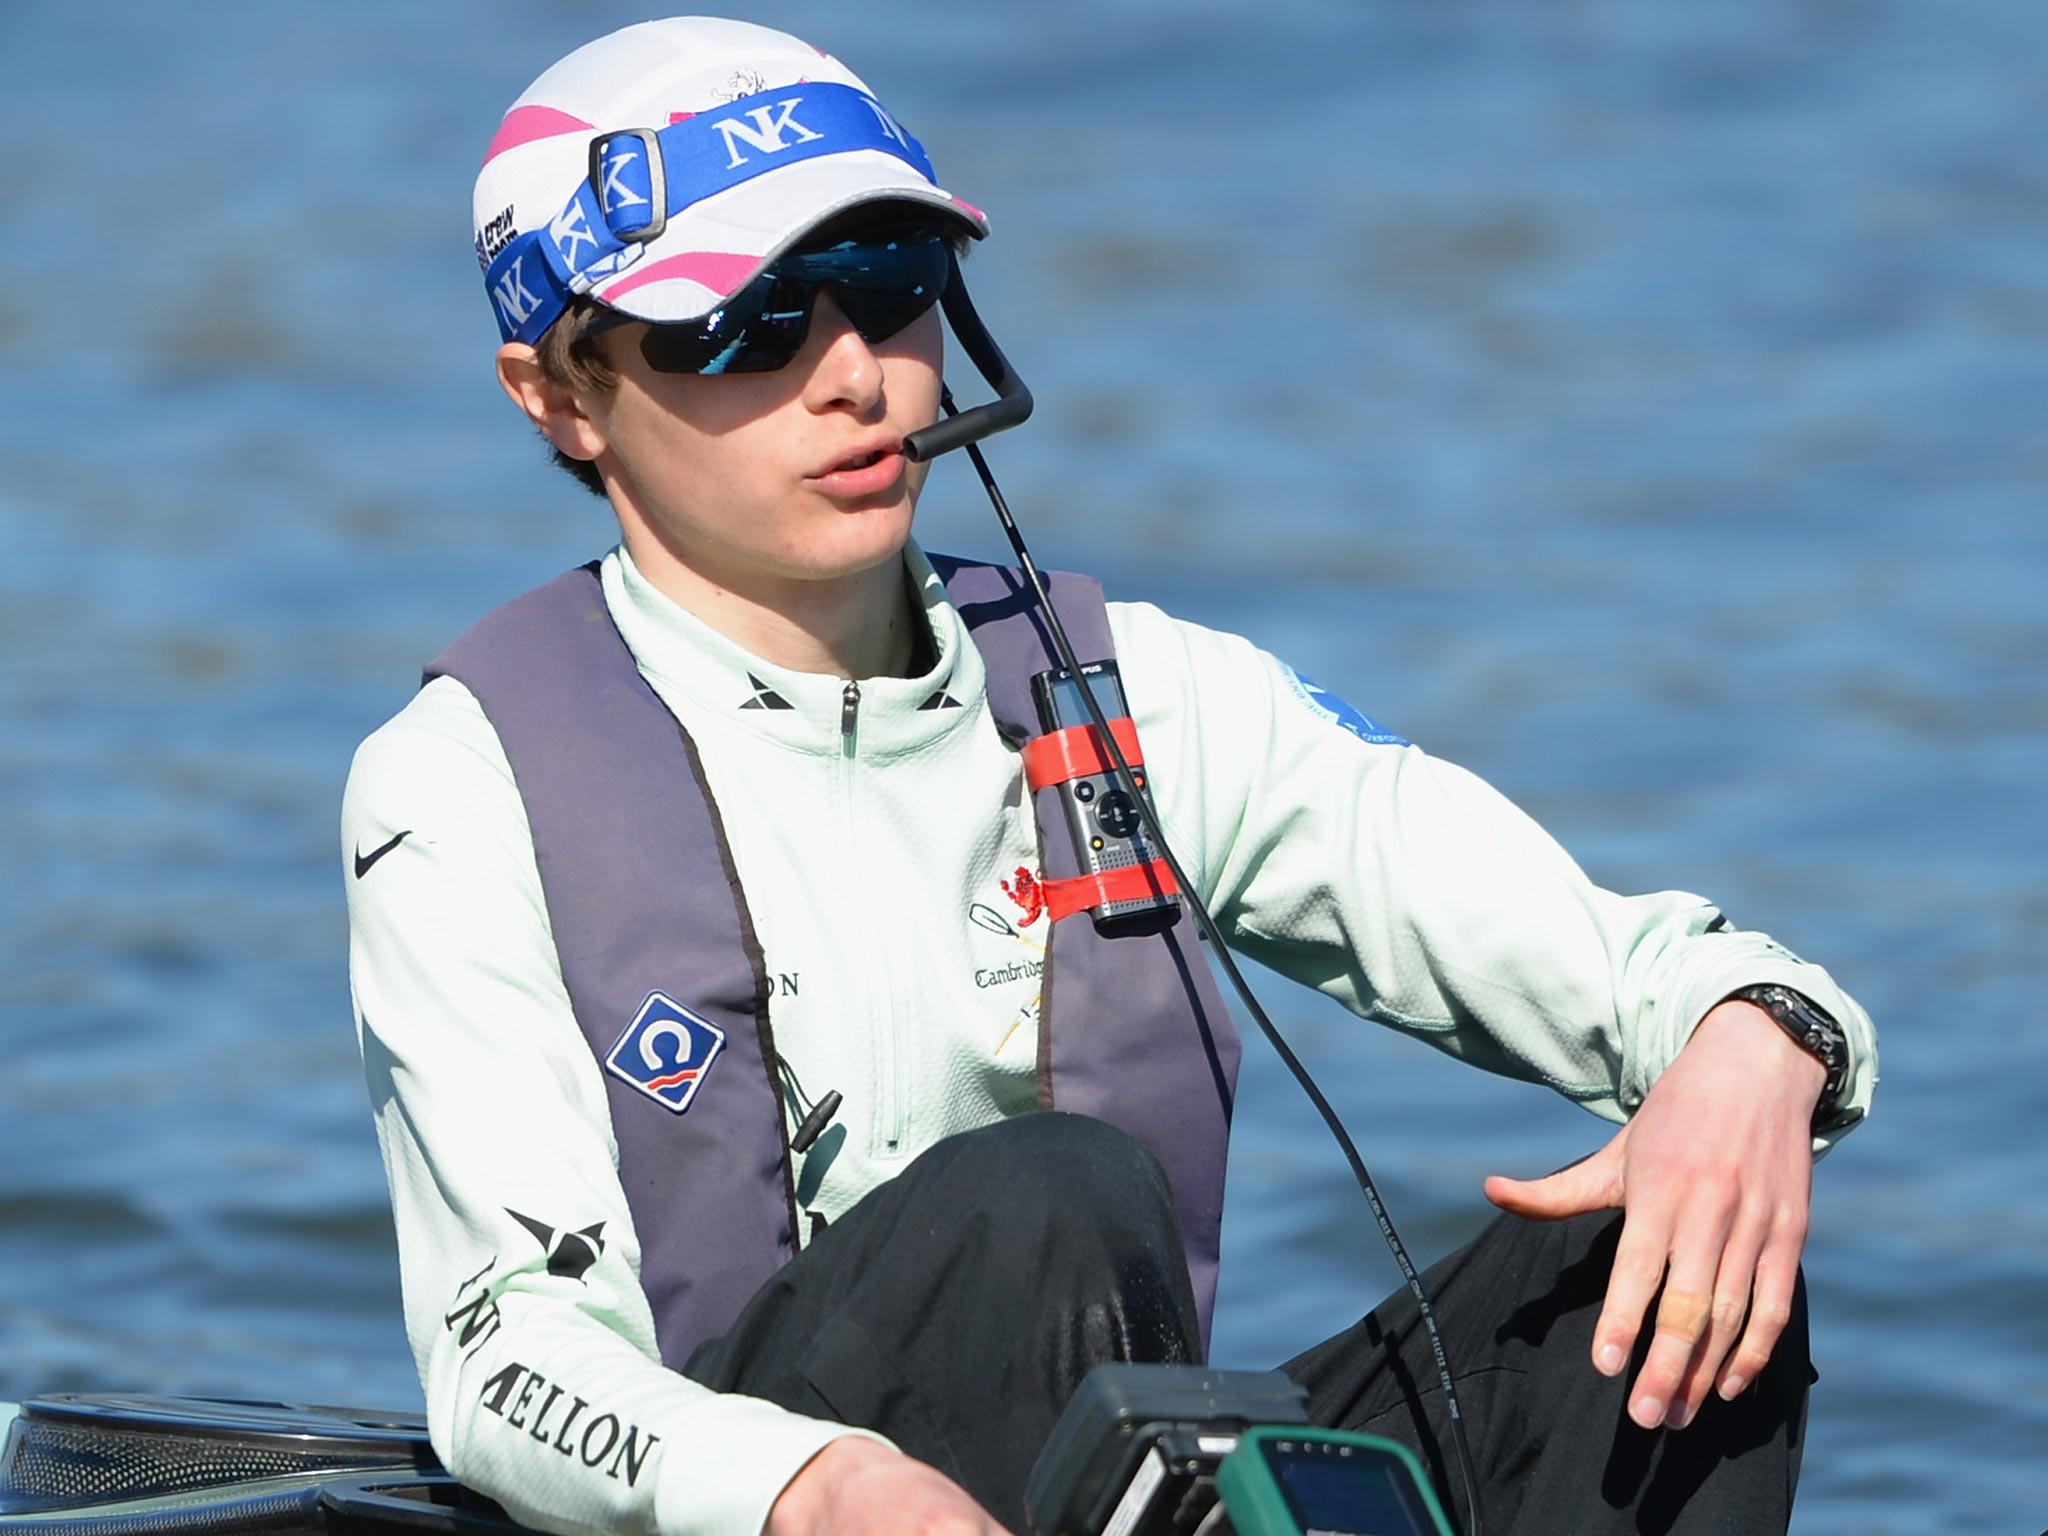 Ian Middleton will cox the Cambridge eight in the 2014 Boat Race